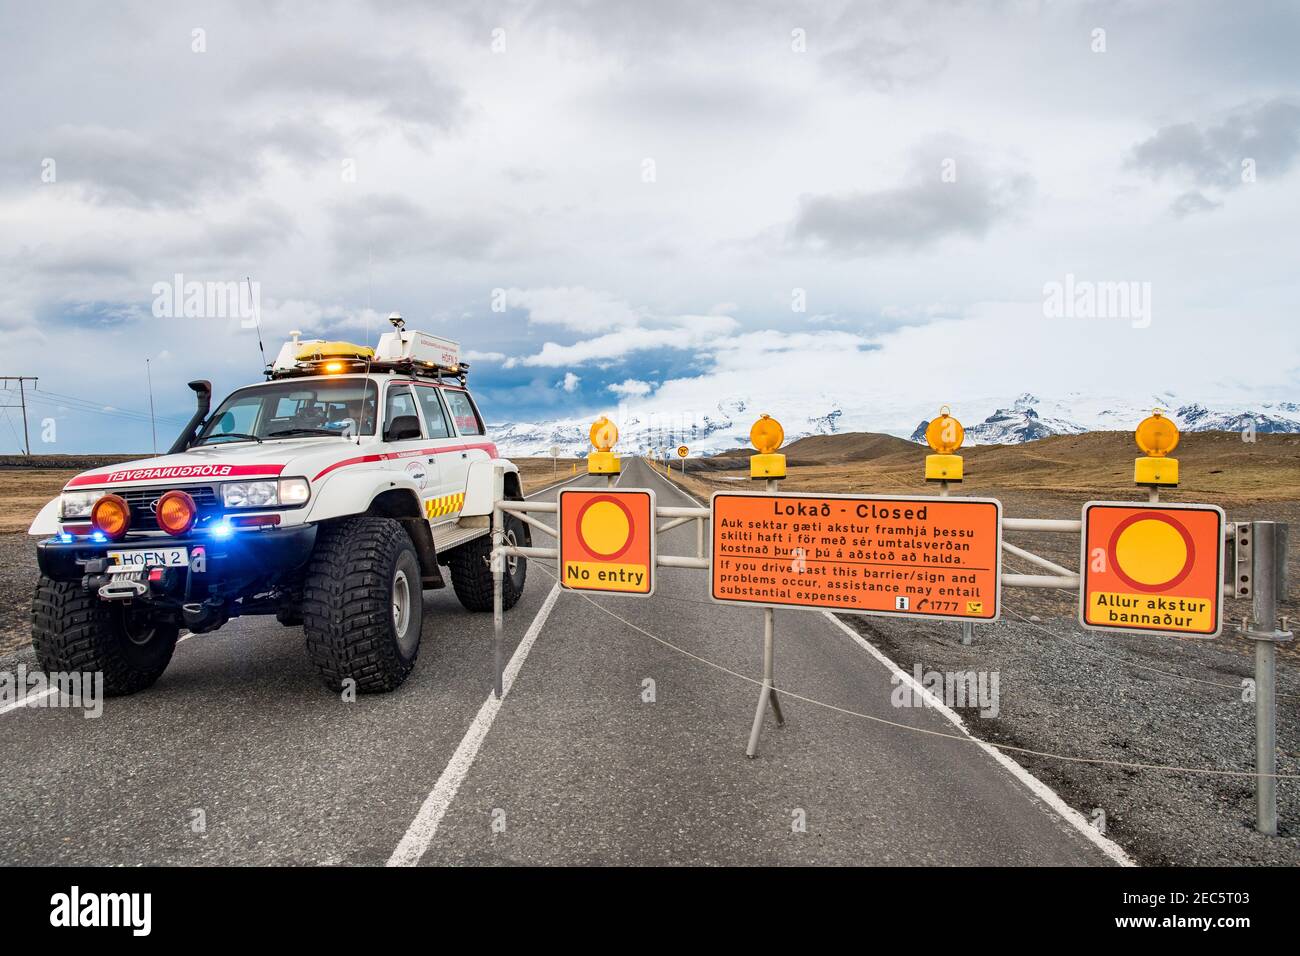 Jokulsarlon Iceland - December 21. 2019: heavily modified search and rescue Toyota Landcruiser 4x4 truck closing the road Stock Photo